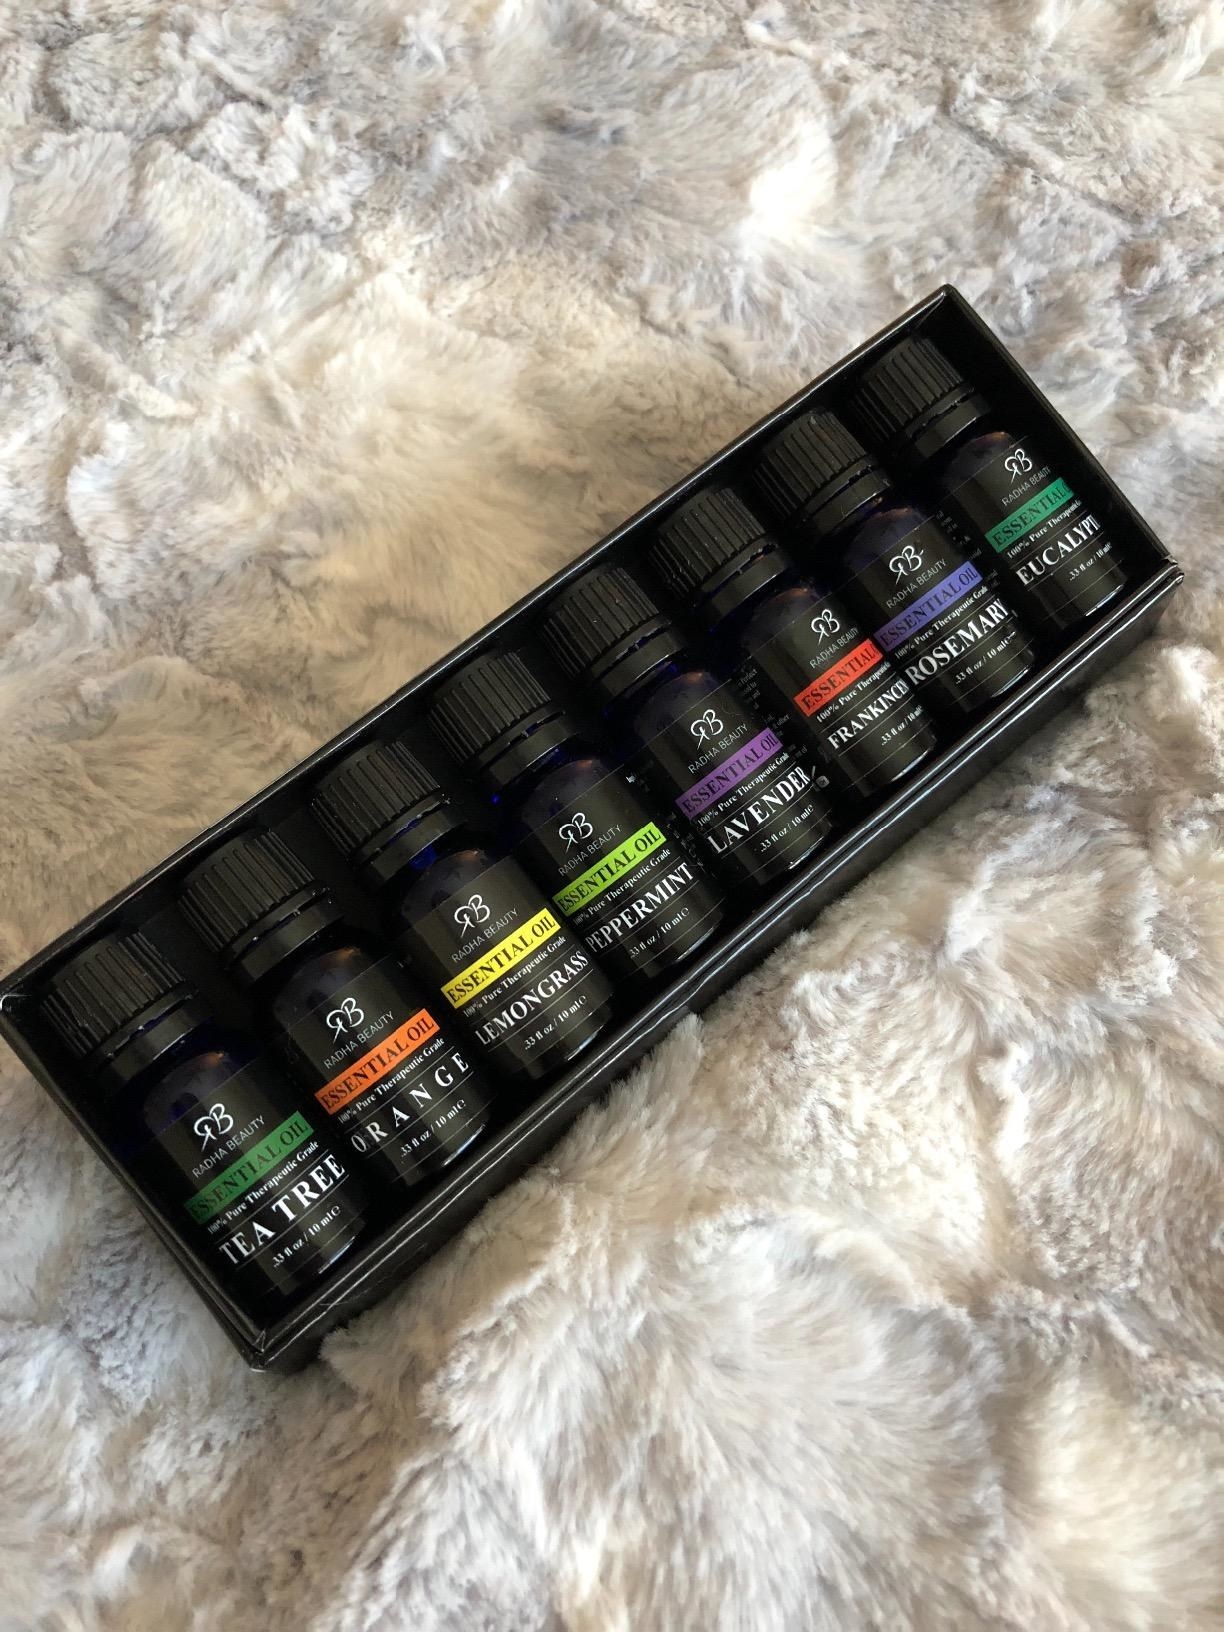 the full essential oil kit with scents tea tree, orange, lemongrass, peppermint, lavender, frankincense, rosemary, and eucalyptus